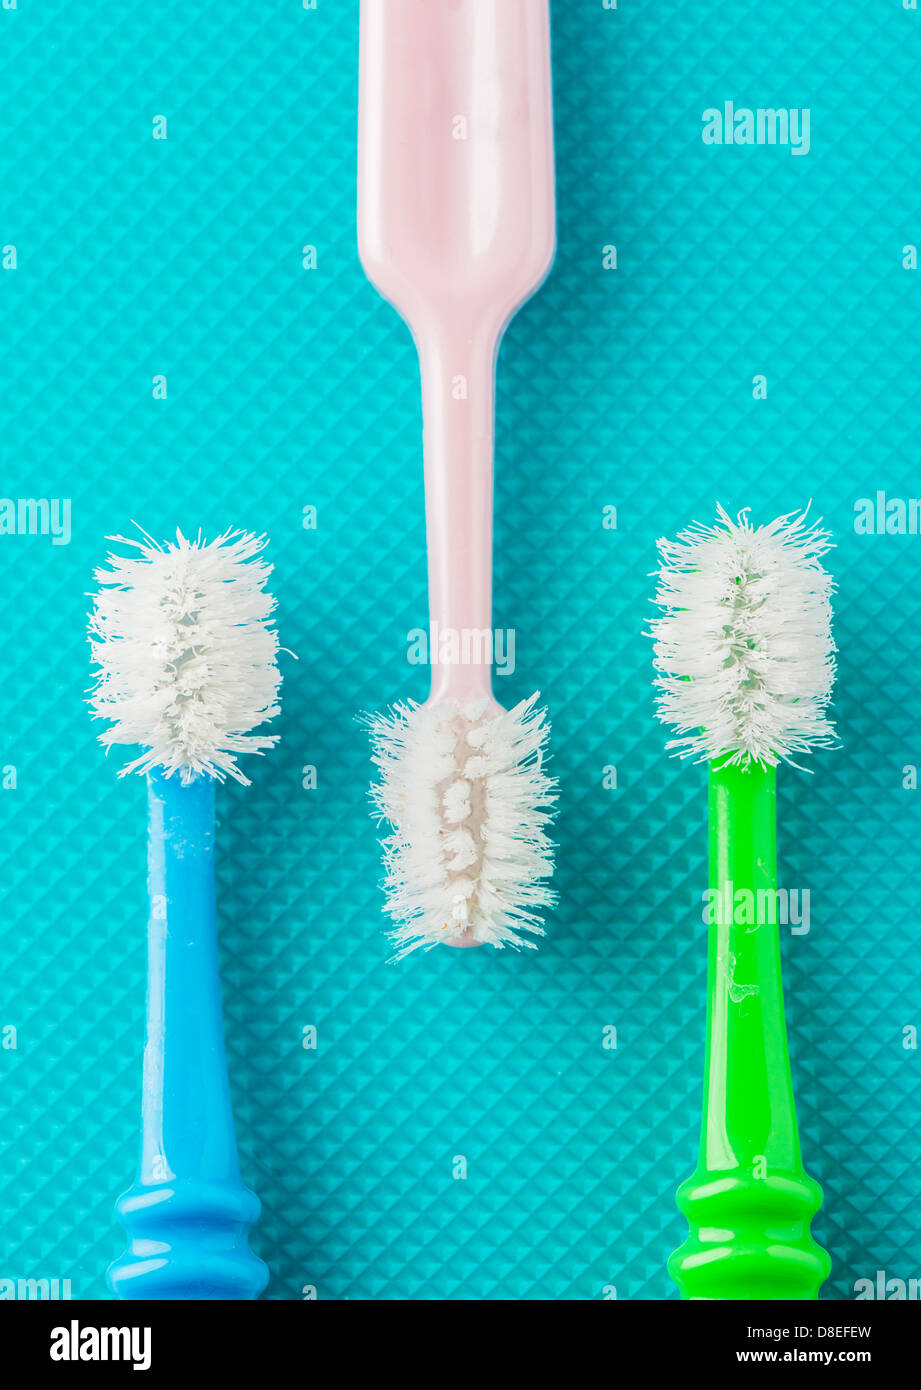 Closeup of three old and well used toothbrushes viewed from above Stock Photo